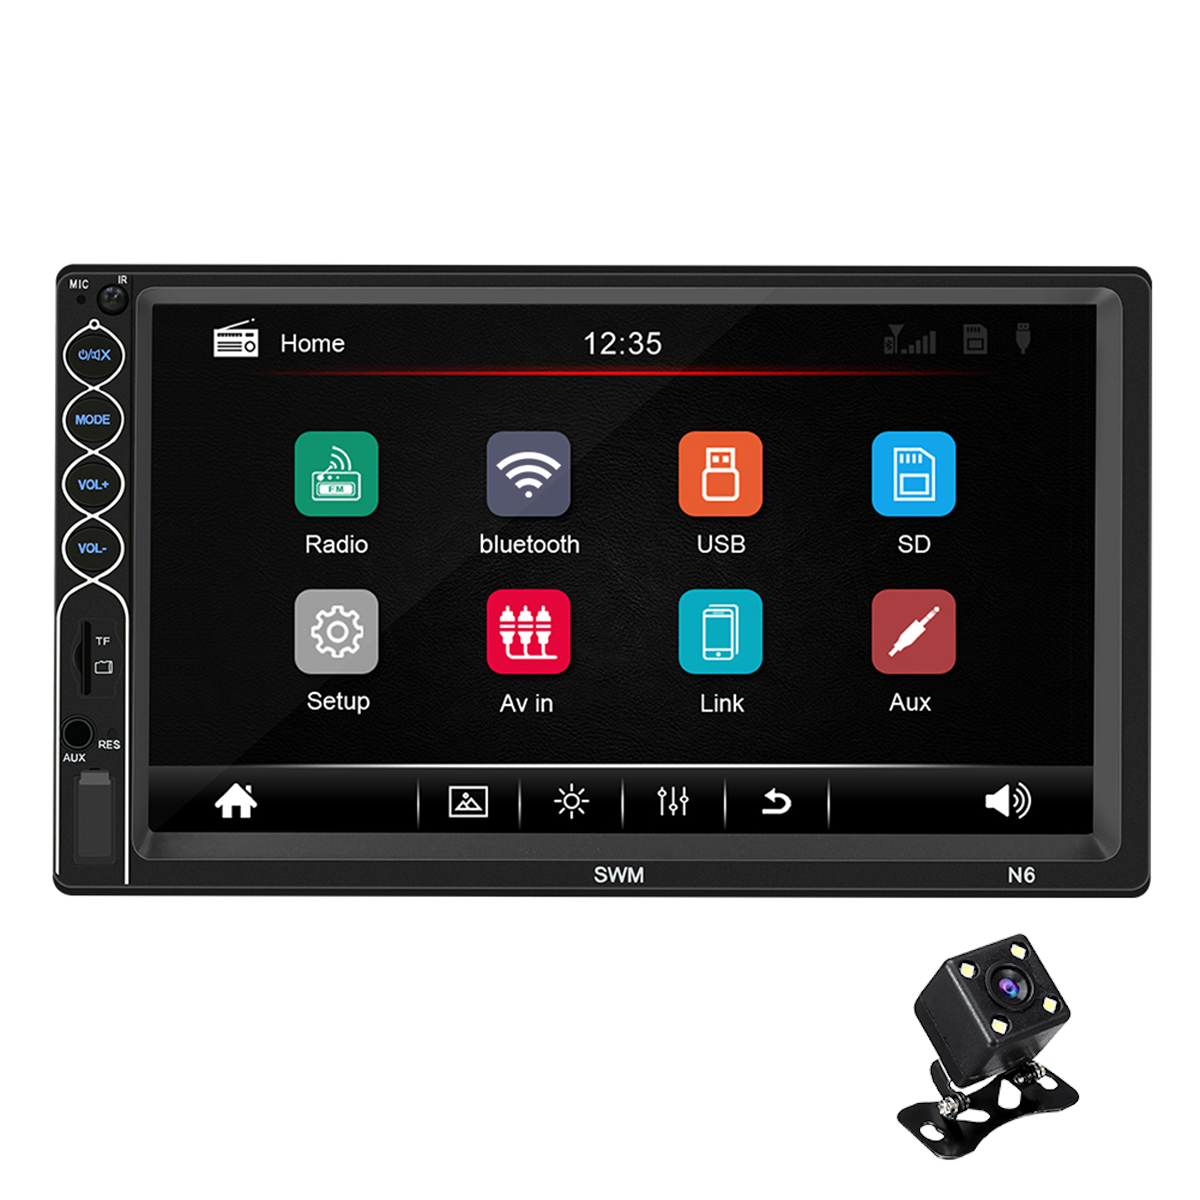 

7 Inch 2 Din N6 For Wince Car Radio Stereo MP5 Player 1+16G bluetooth GPS Touch Screen HDNAV FM AUX USB With Rear View